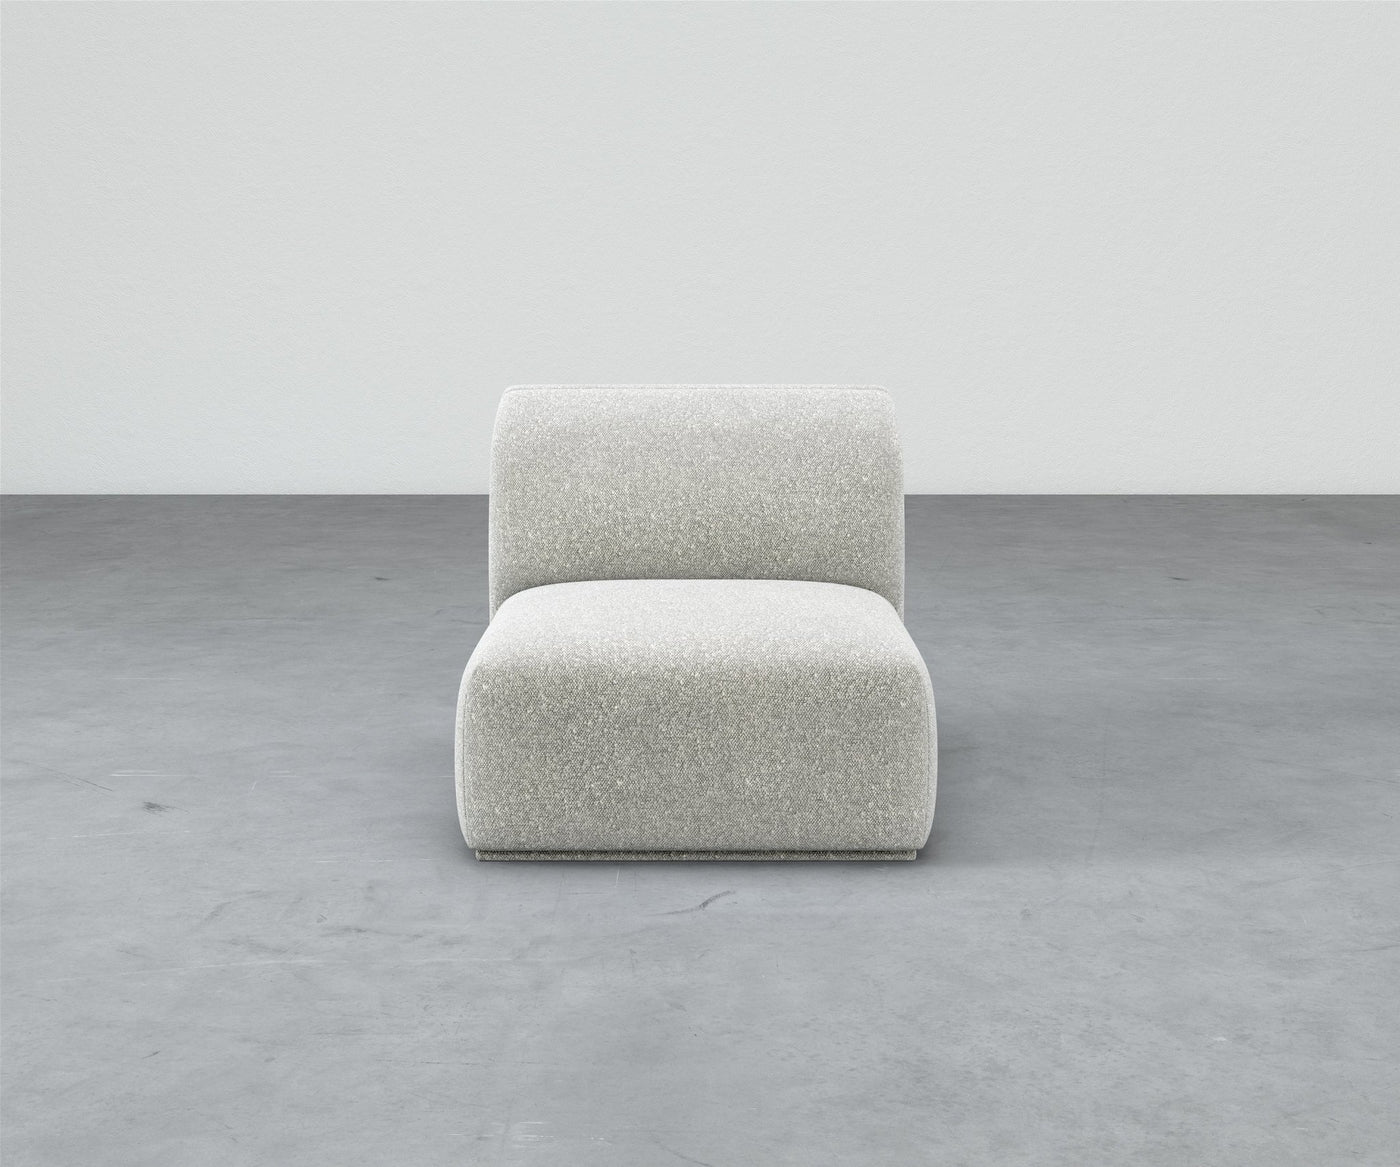 Formal Mallo Armless Chair - Modular Component #base_recessed-fabric-wrapped